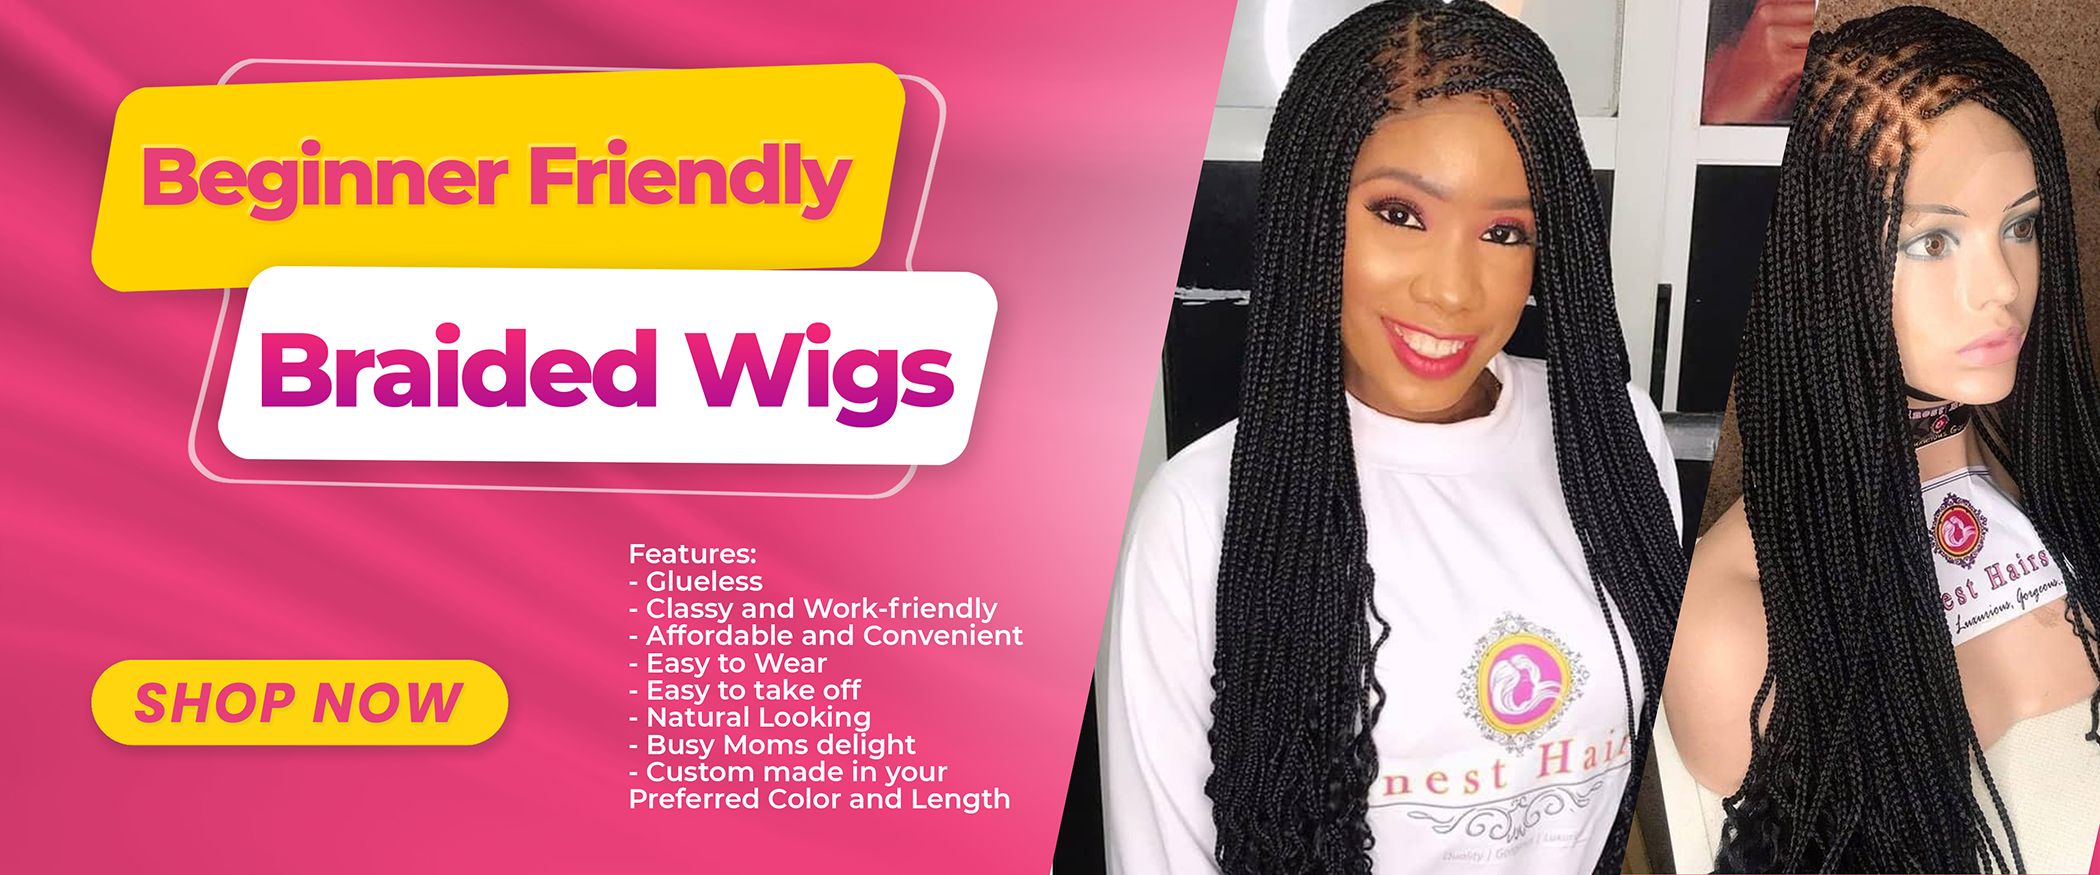 This is for the Beginner Friendly Wigs Page